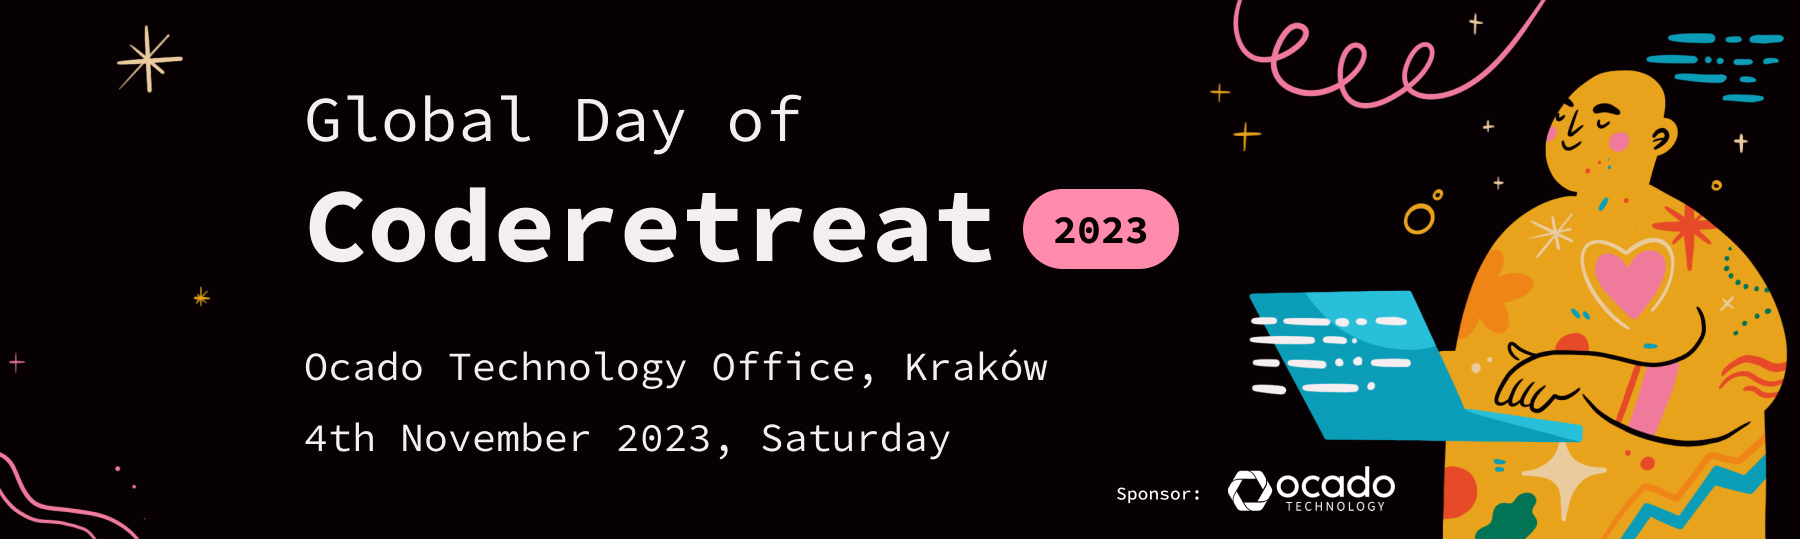 global-day-of-coderetreat-2023-software-crafters-krakow-ocado-technology